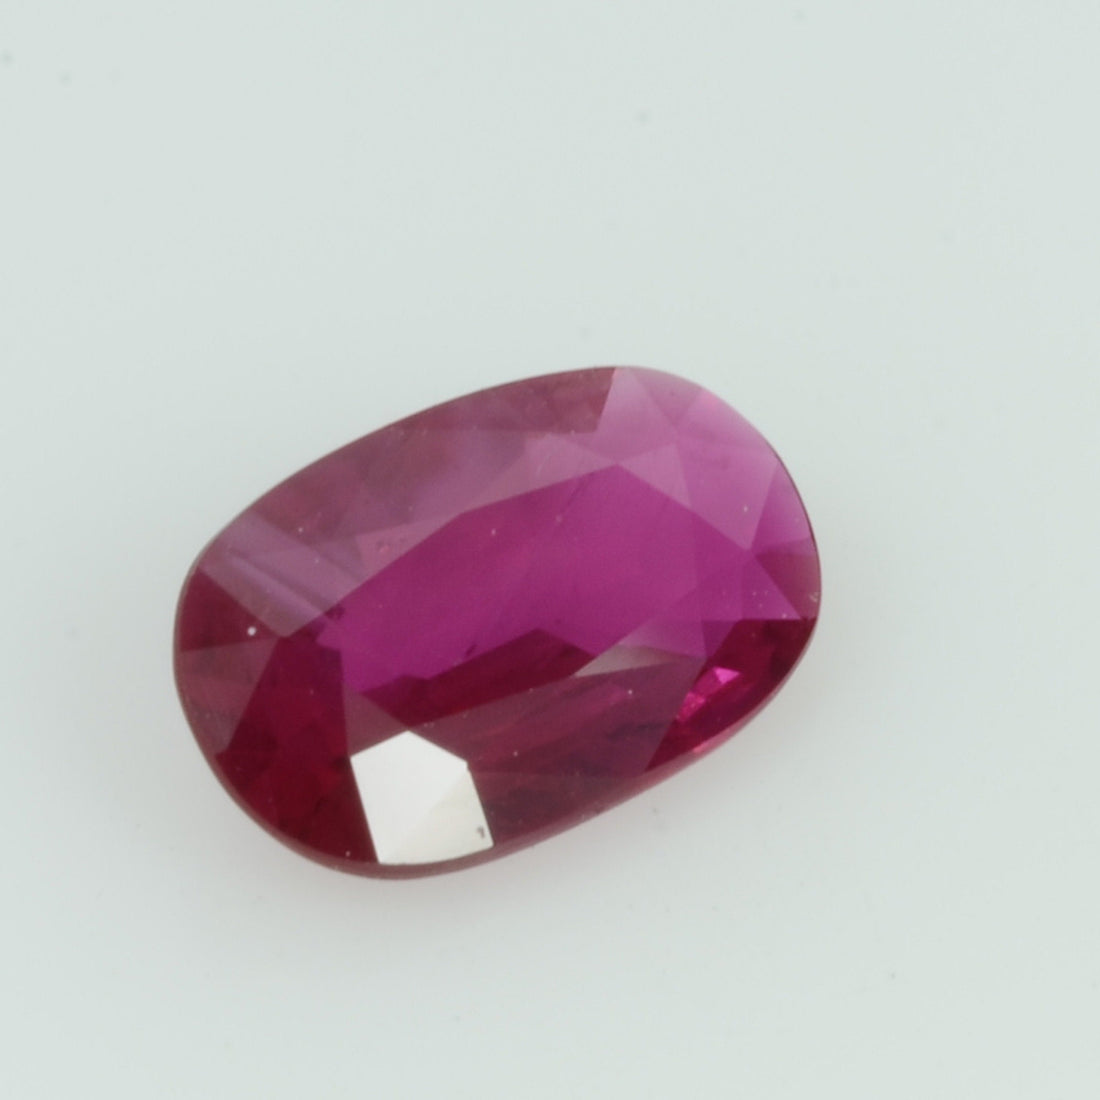 0.76 Cts Natural Vietnam Ruby Loose Gemstone Oval Cut